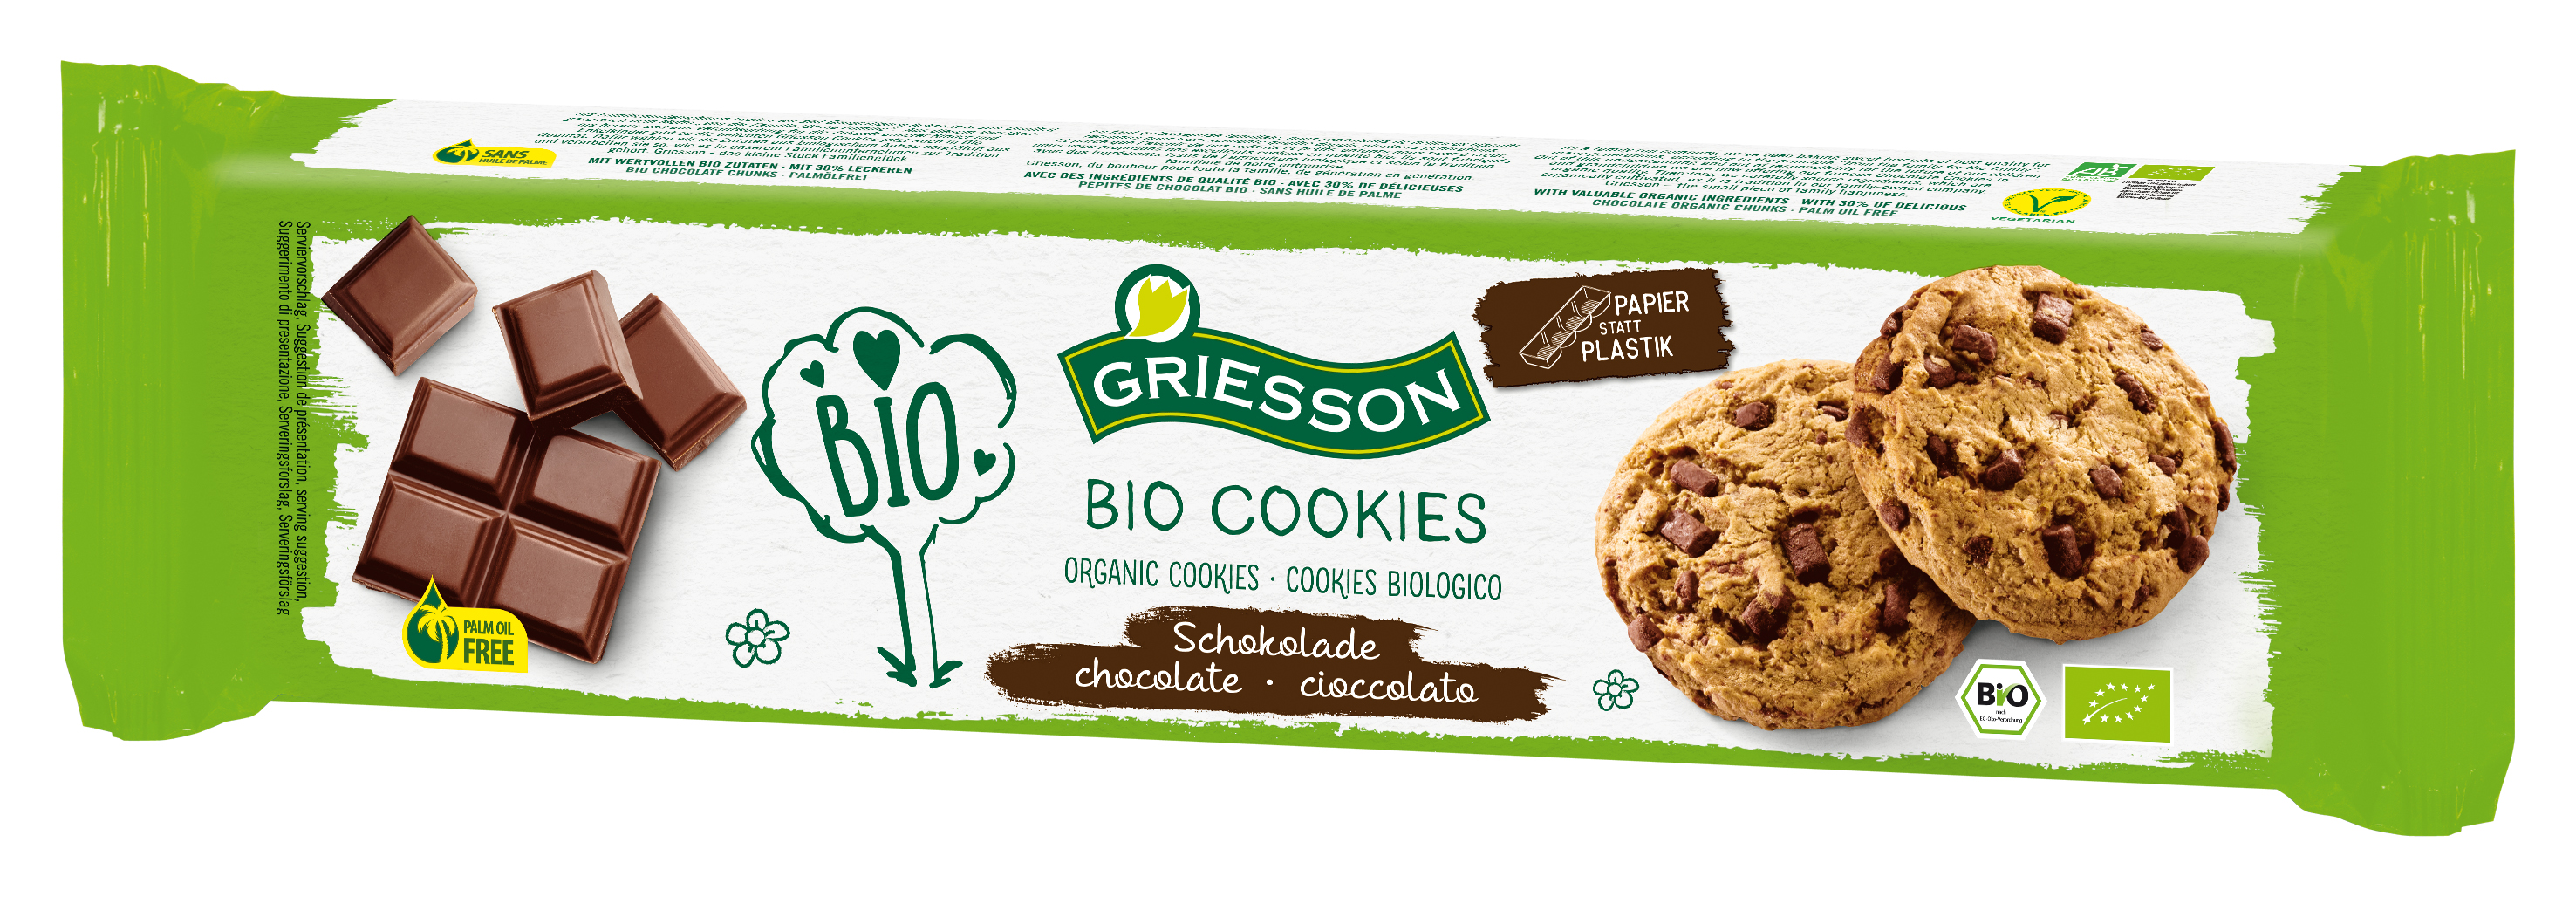 Griesson Bio Cookies 133g